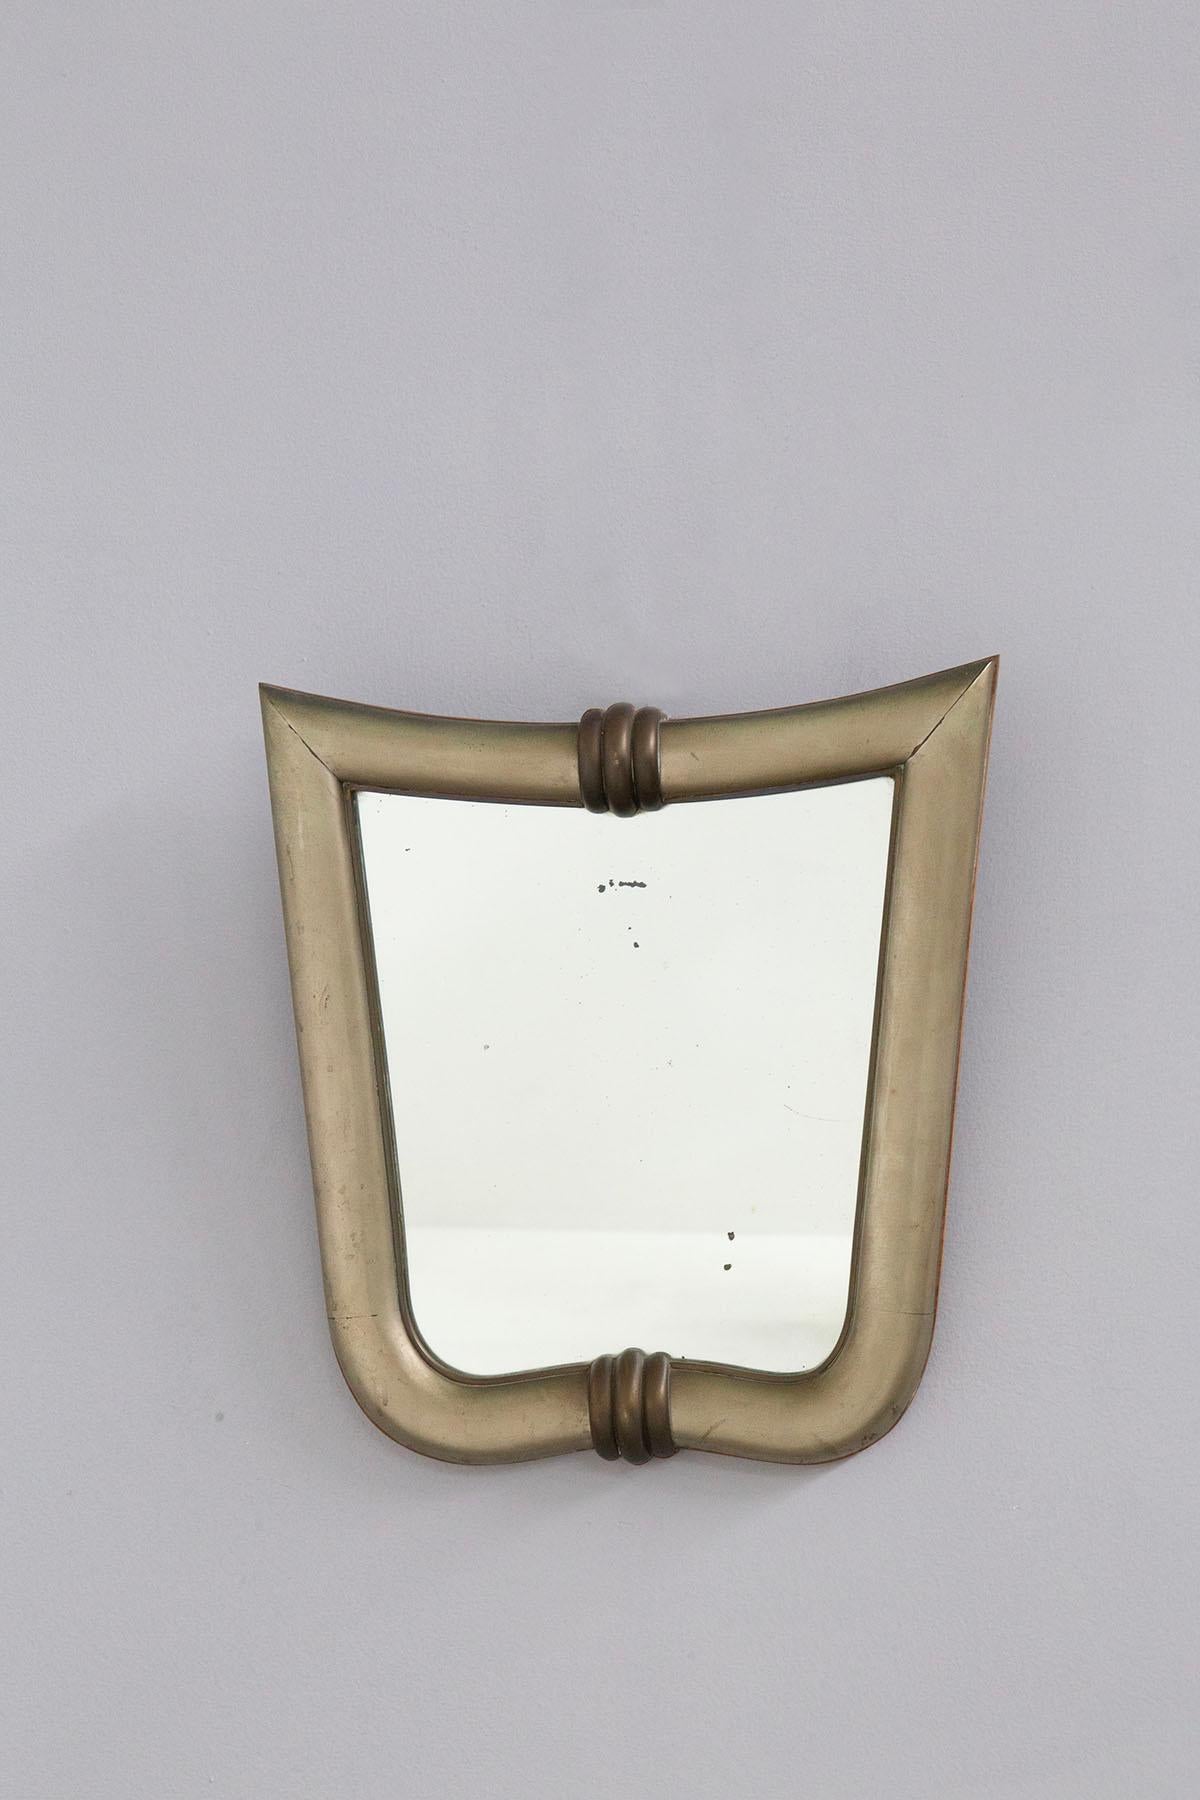 Very rare wall mirror attribuited the great Italian architect Gio Ponti, 1930s. Made with a wooden body i.e. with a wooden frame. The frame has been finished with silver leaf to give a shiny, metallic effect to the rare mirror. 
The mirror has